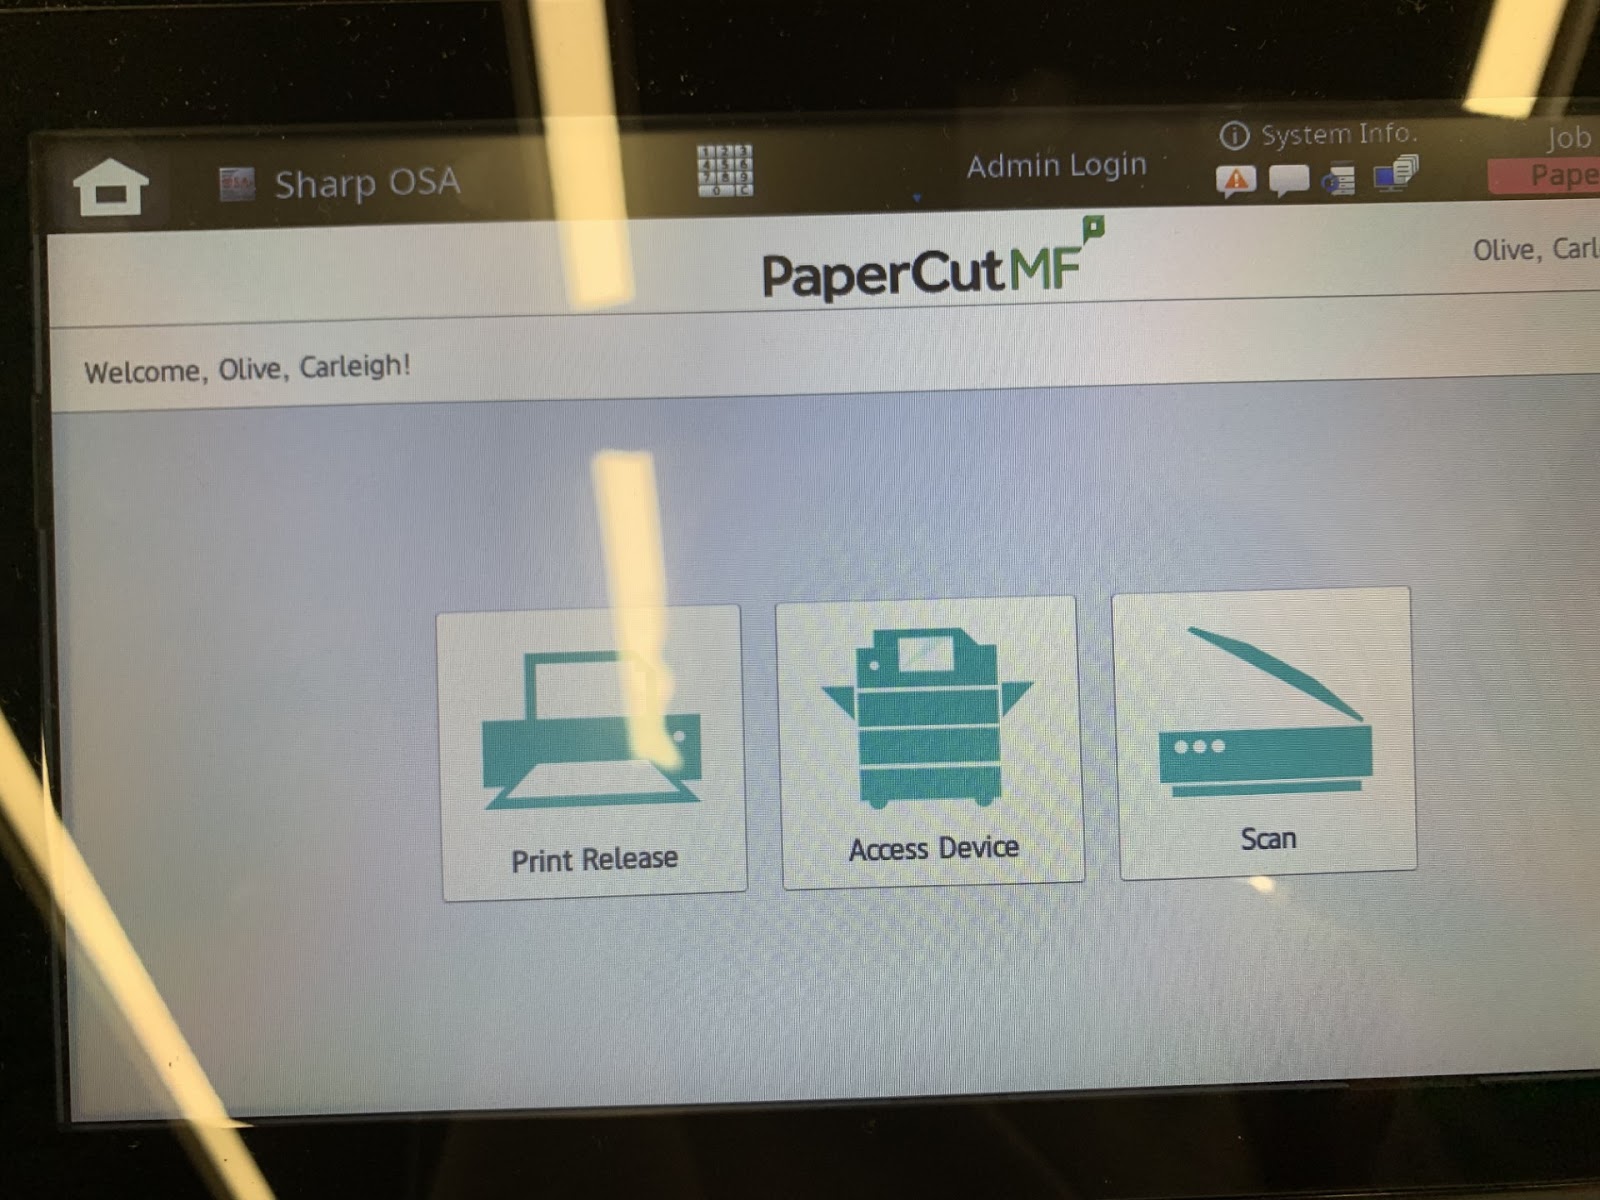 Picture of the screen on the copier that has three icons. The one on the far left with the printer graphic says "Print Release." The one in the middle with a graphic of their copier says "Access Device." The graphic of a scanner on the far right says "Scan."